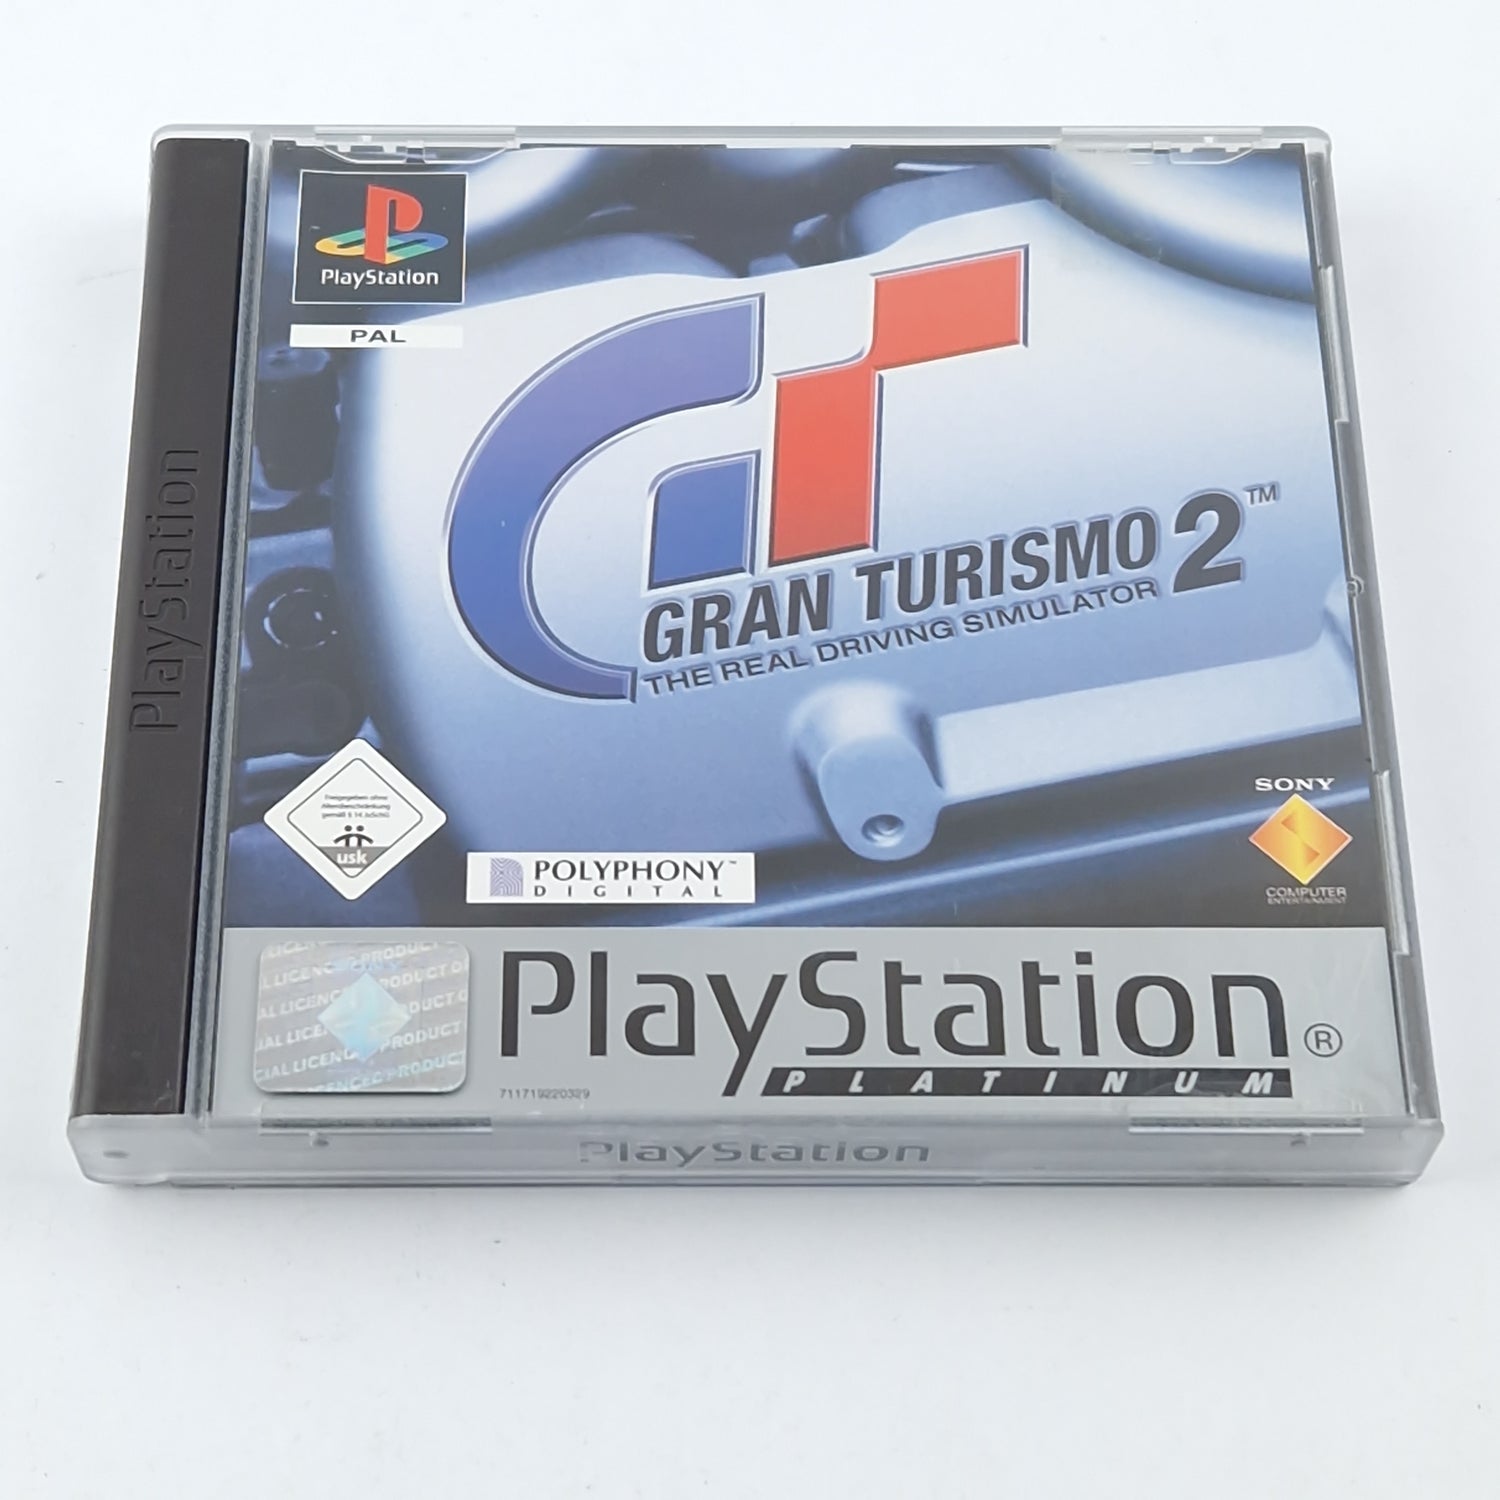 Playstation 1 game: Gran Turismo 2 - CD instructions OVP / SONY PS1 Psx PAL